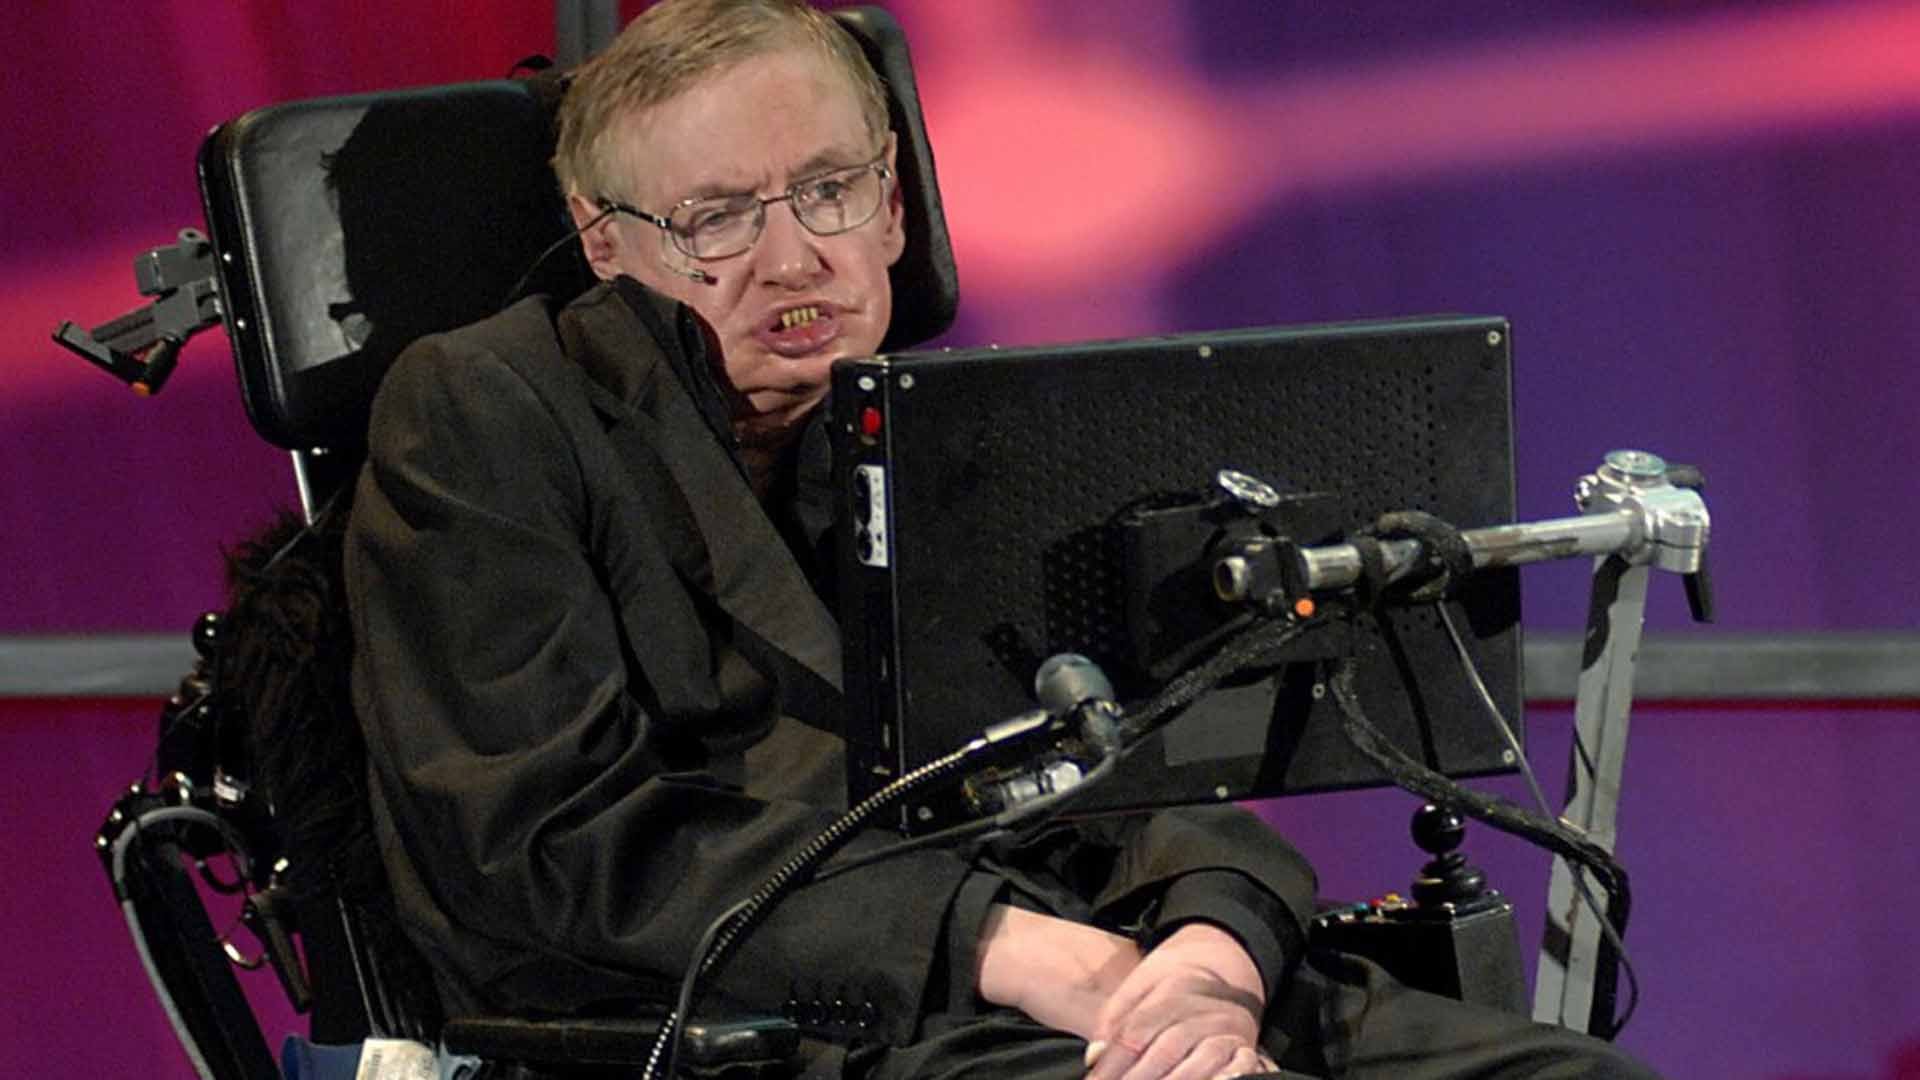 Stephen Hawking raises his voice against technology threat, saves humanity